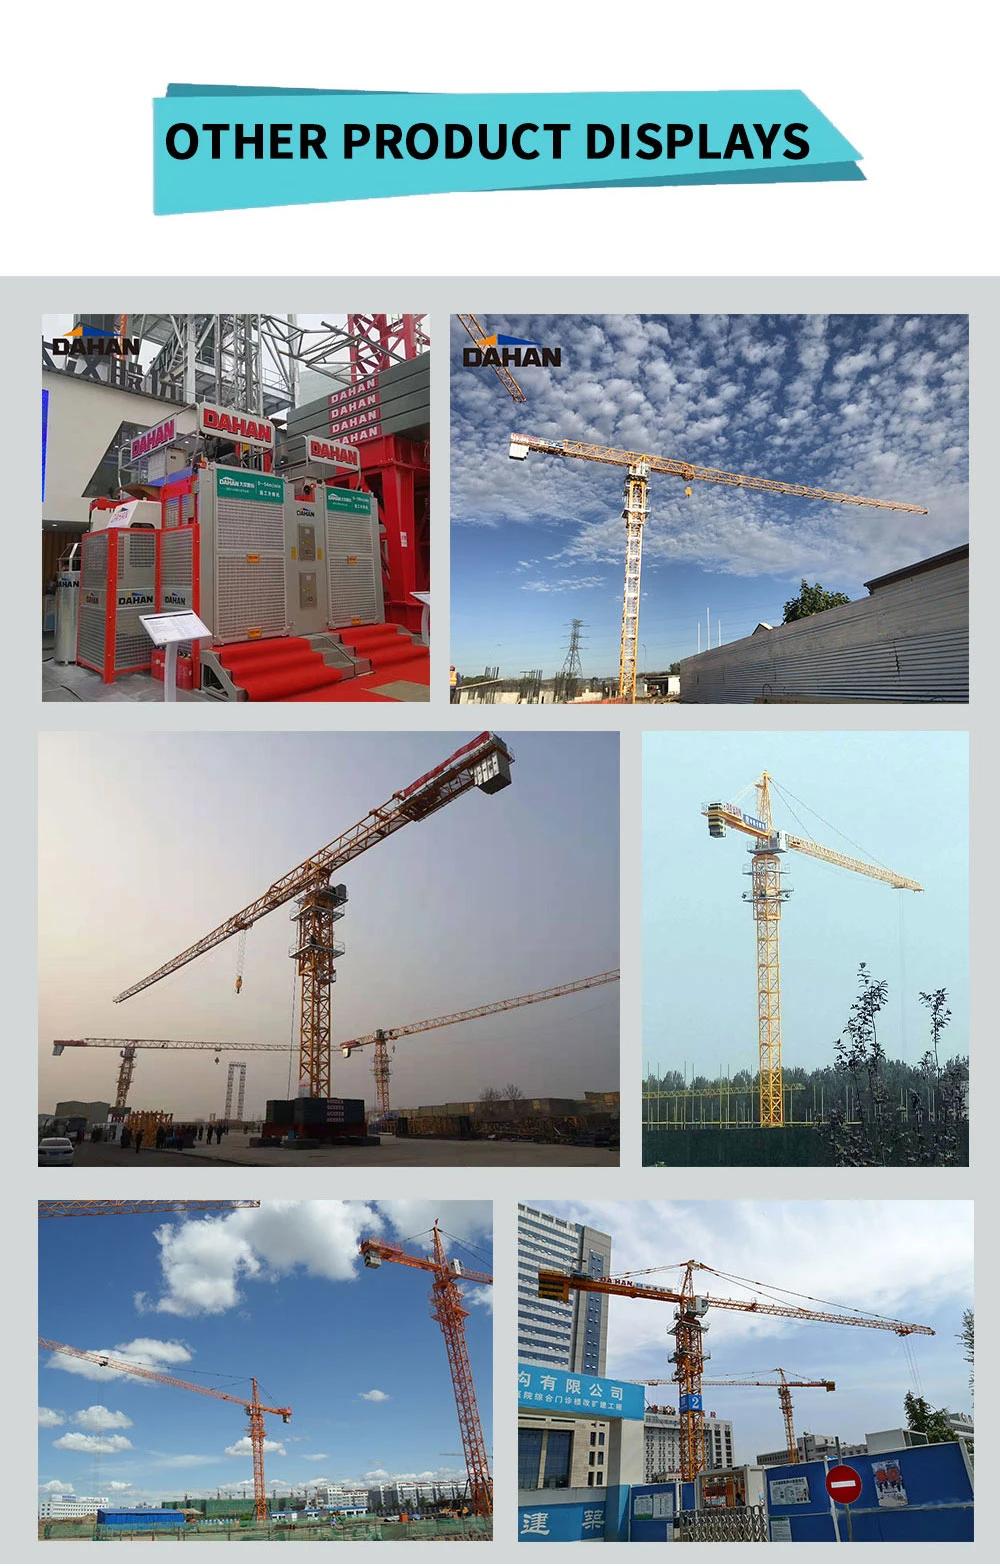 Dahan Provided 8 Ton Tower Cap Tower Crane Widely Used in Construction Sites